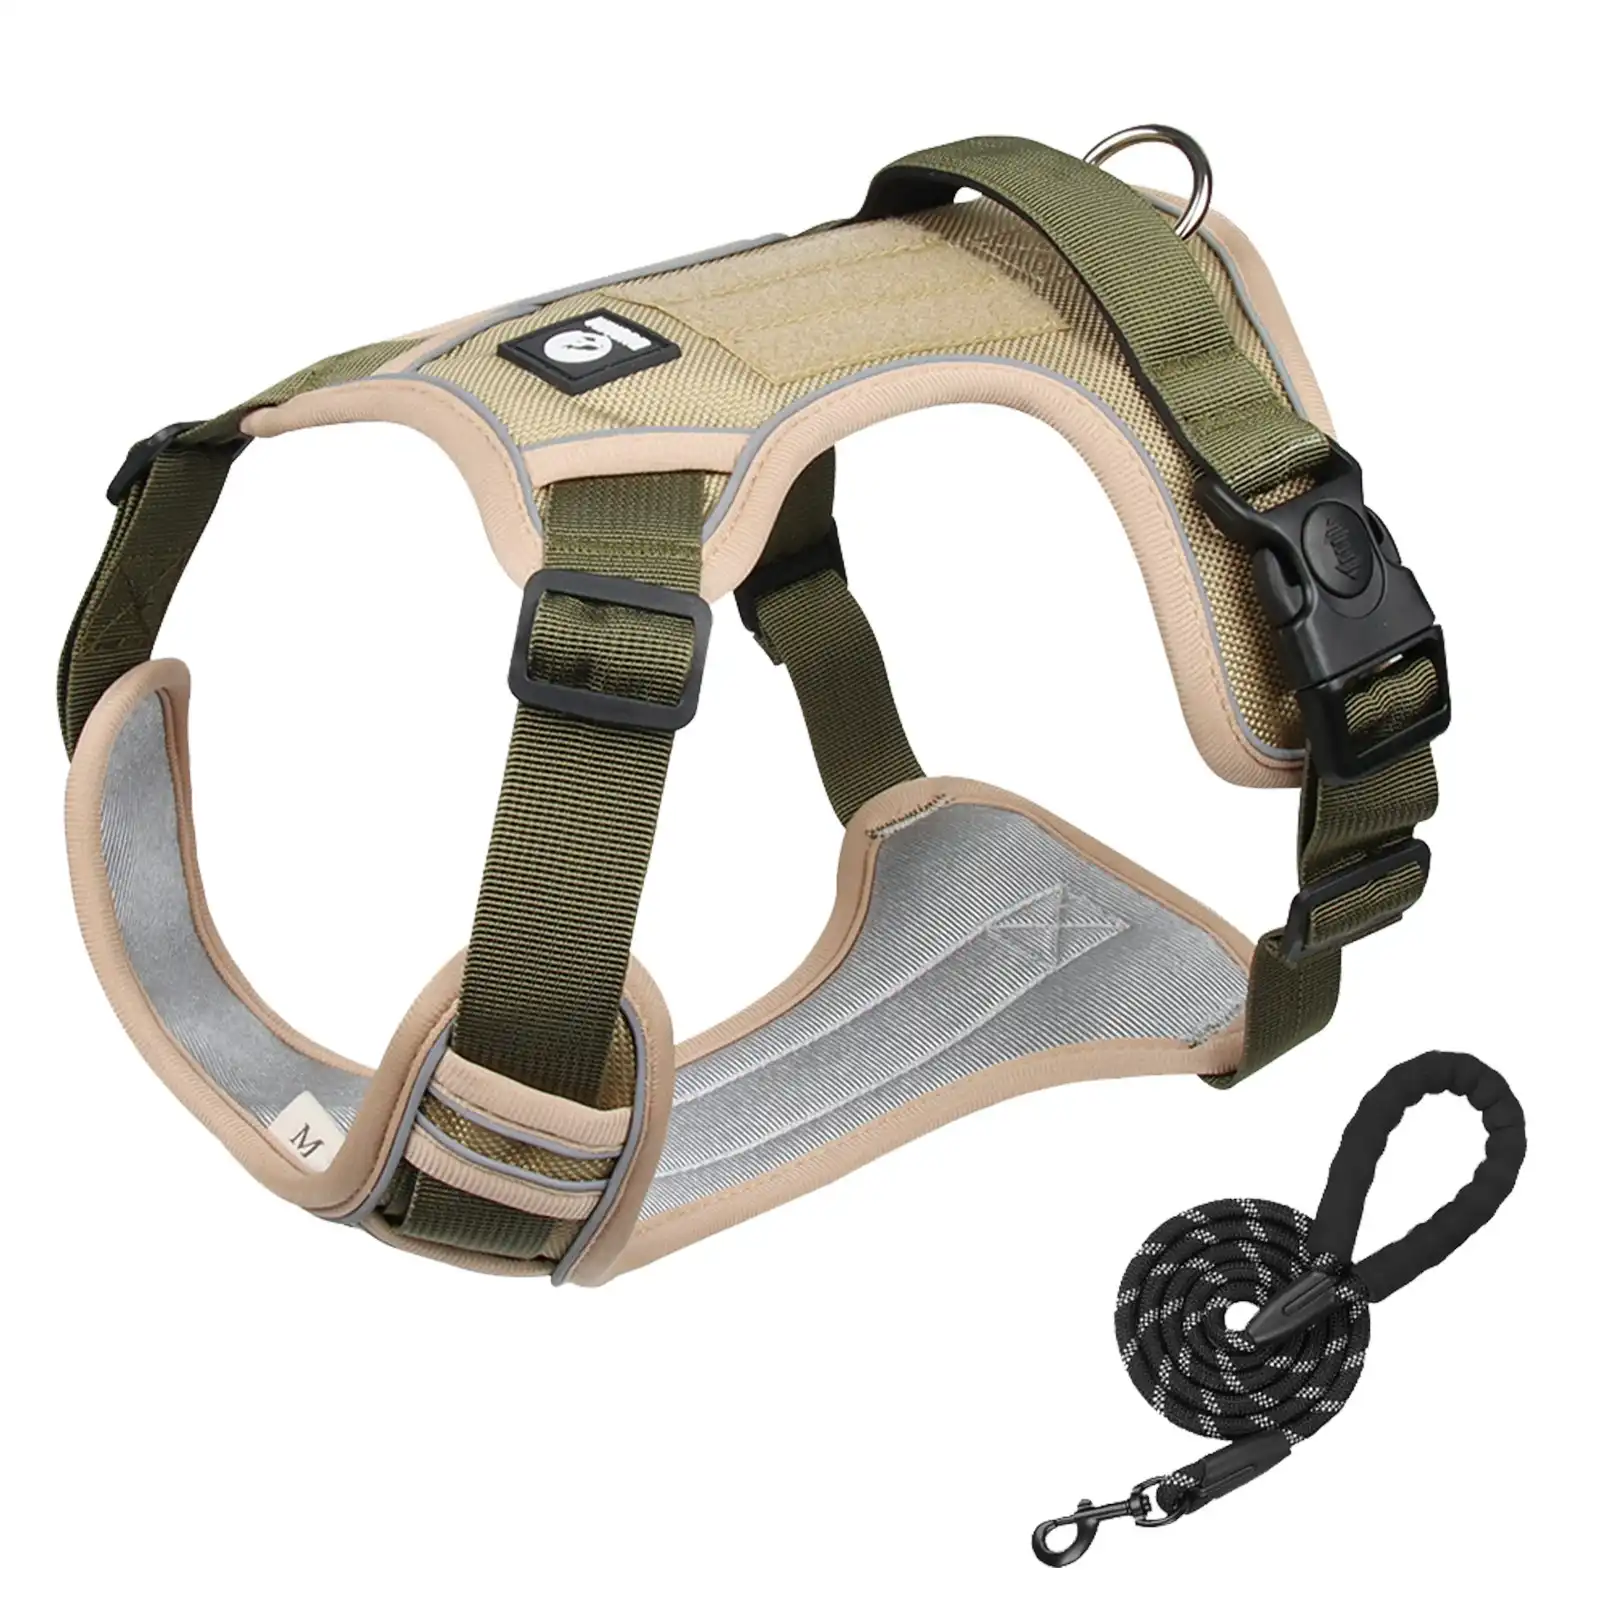 Furbulous Tactical Dog Harness Adjustable No Pull Pet Harness Training Dog Harness with 1.5m Lead - Khaki Large